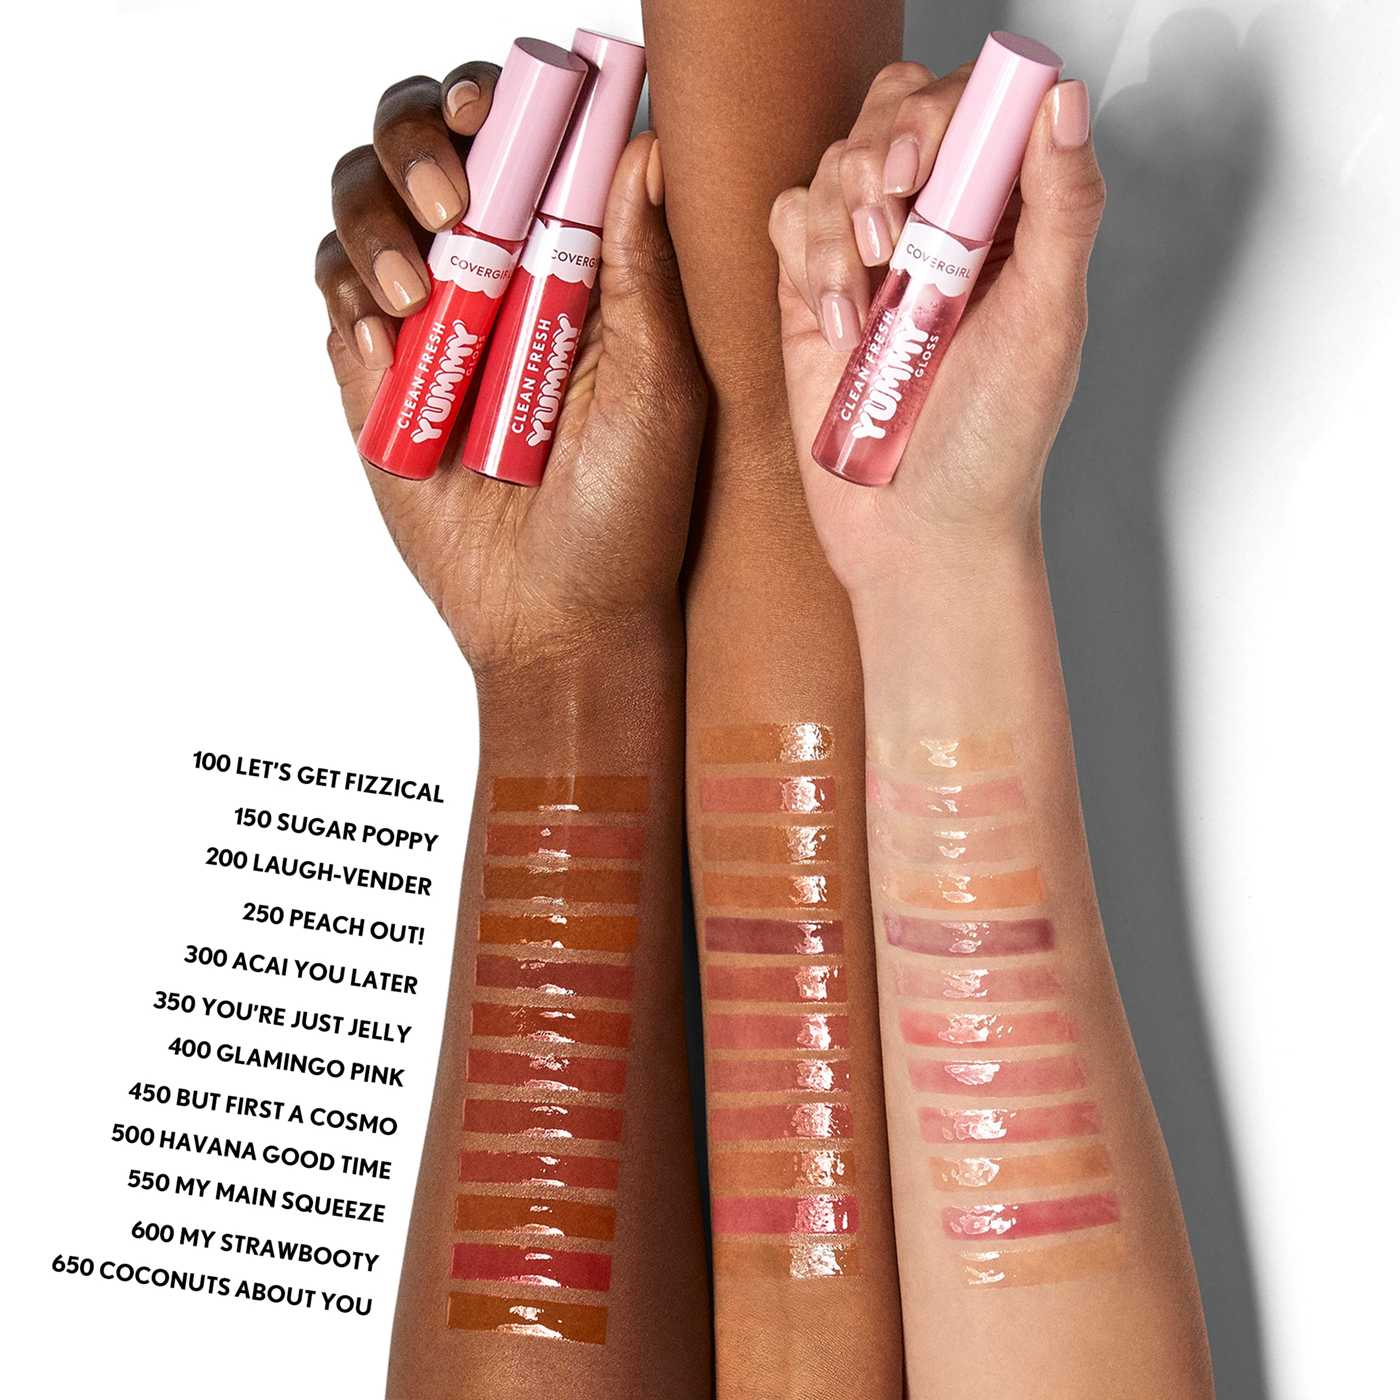 Covergirl Clean Fresh Yummy Lip Gloss - You're Just Jelly; image 2 of 10